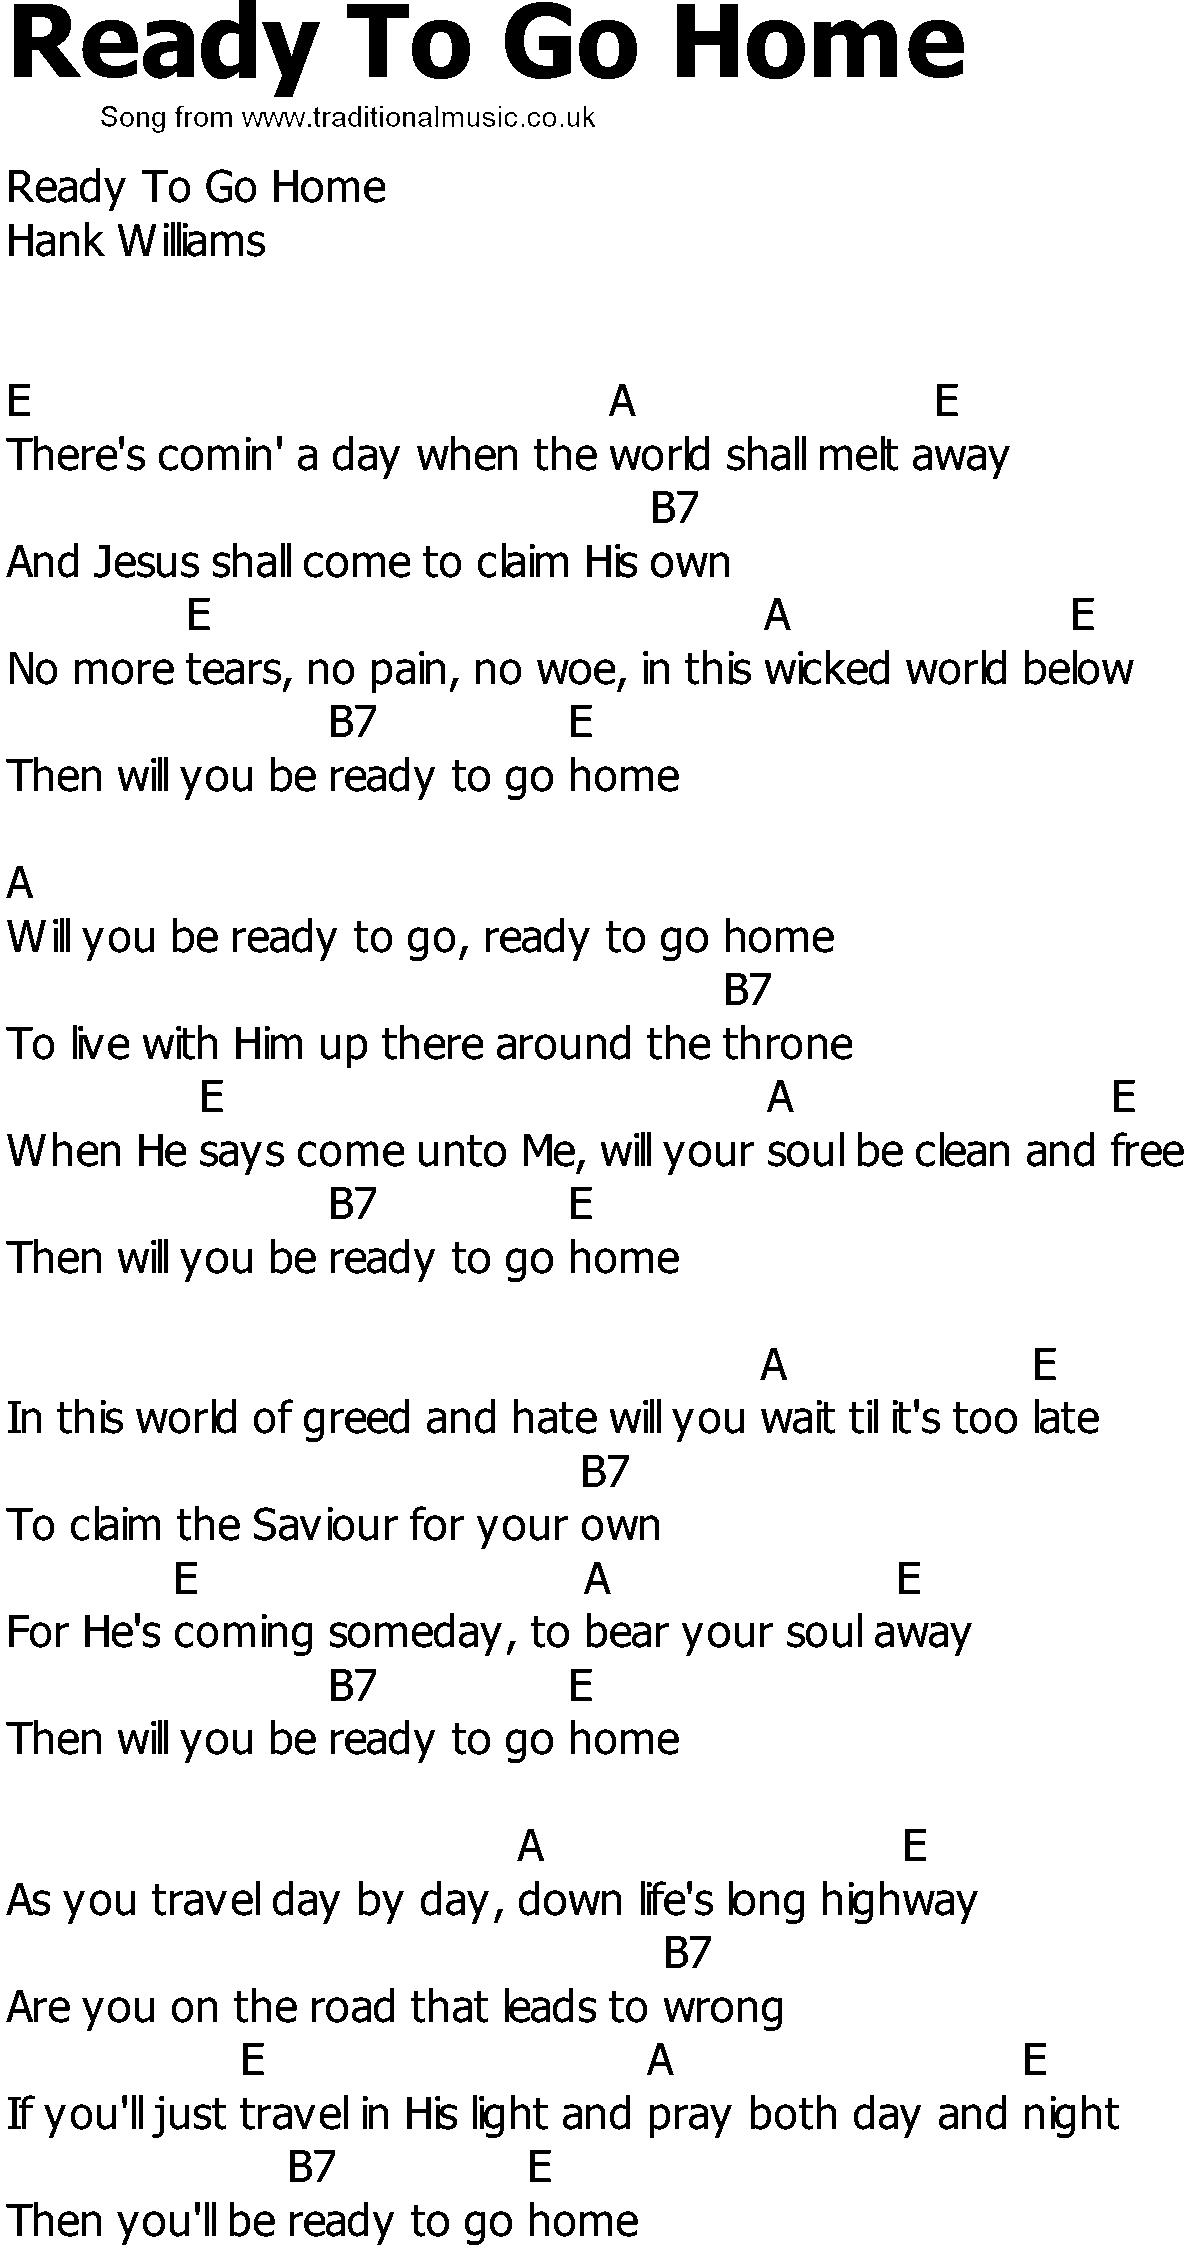 Old Country song lyrics with chords - Ready To Go Home